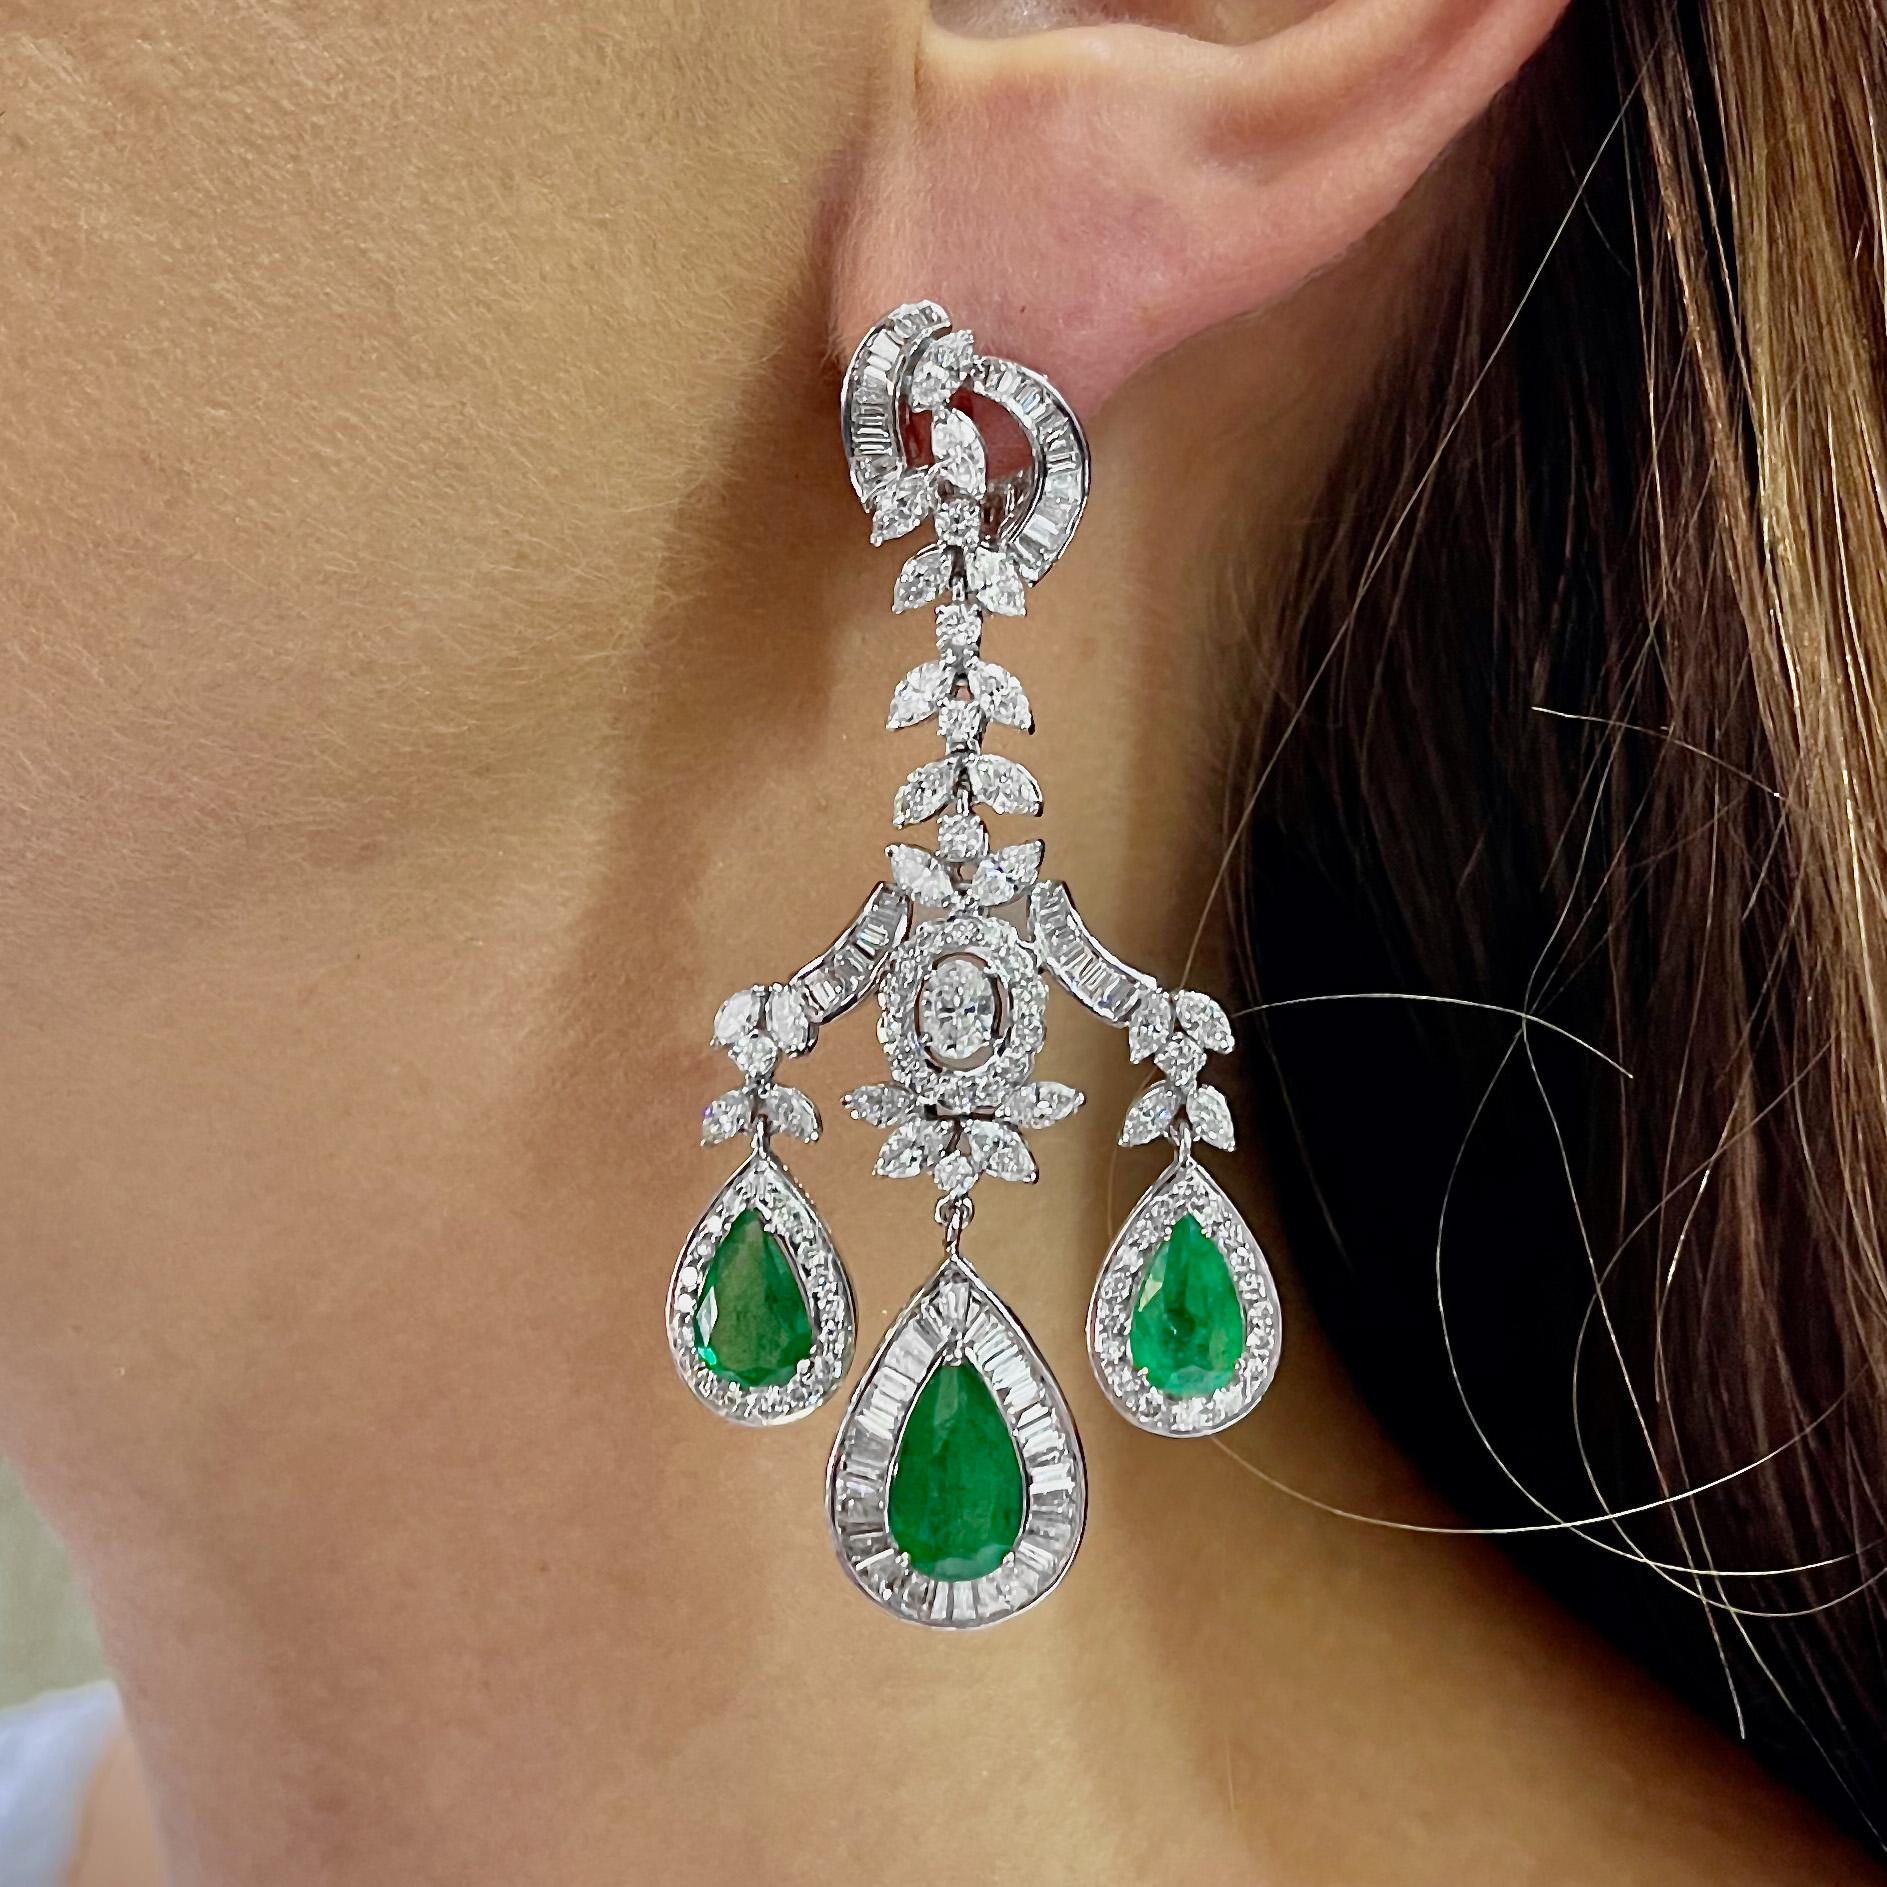 It comes with the Gemological Appraisal by GIA GG/AJP
All Gemstones are Natural
Emeralds = 8.45 Carats
Diamonds = 9.44 Carats
( Color: F-G, Clarity: VVS-VS )
Metal: 18K White Gold
Dimensions: 70 x 33 mm